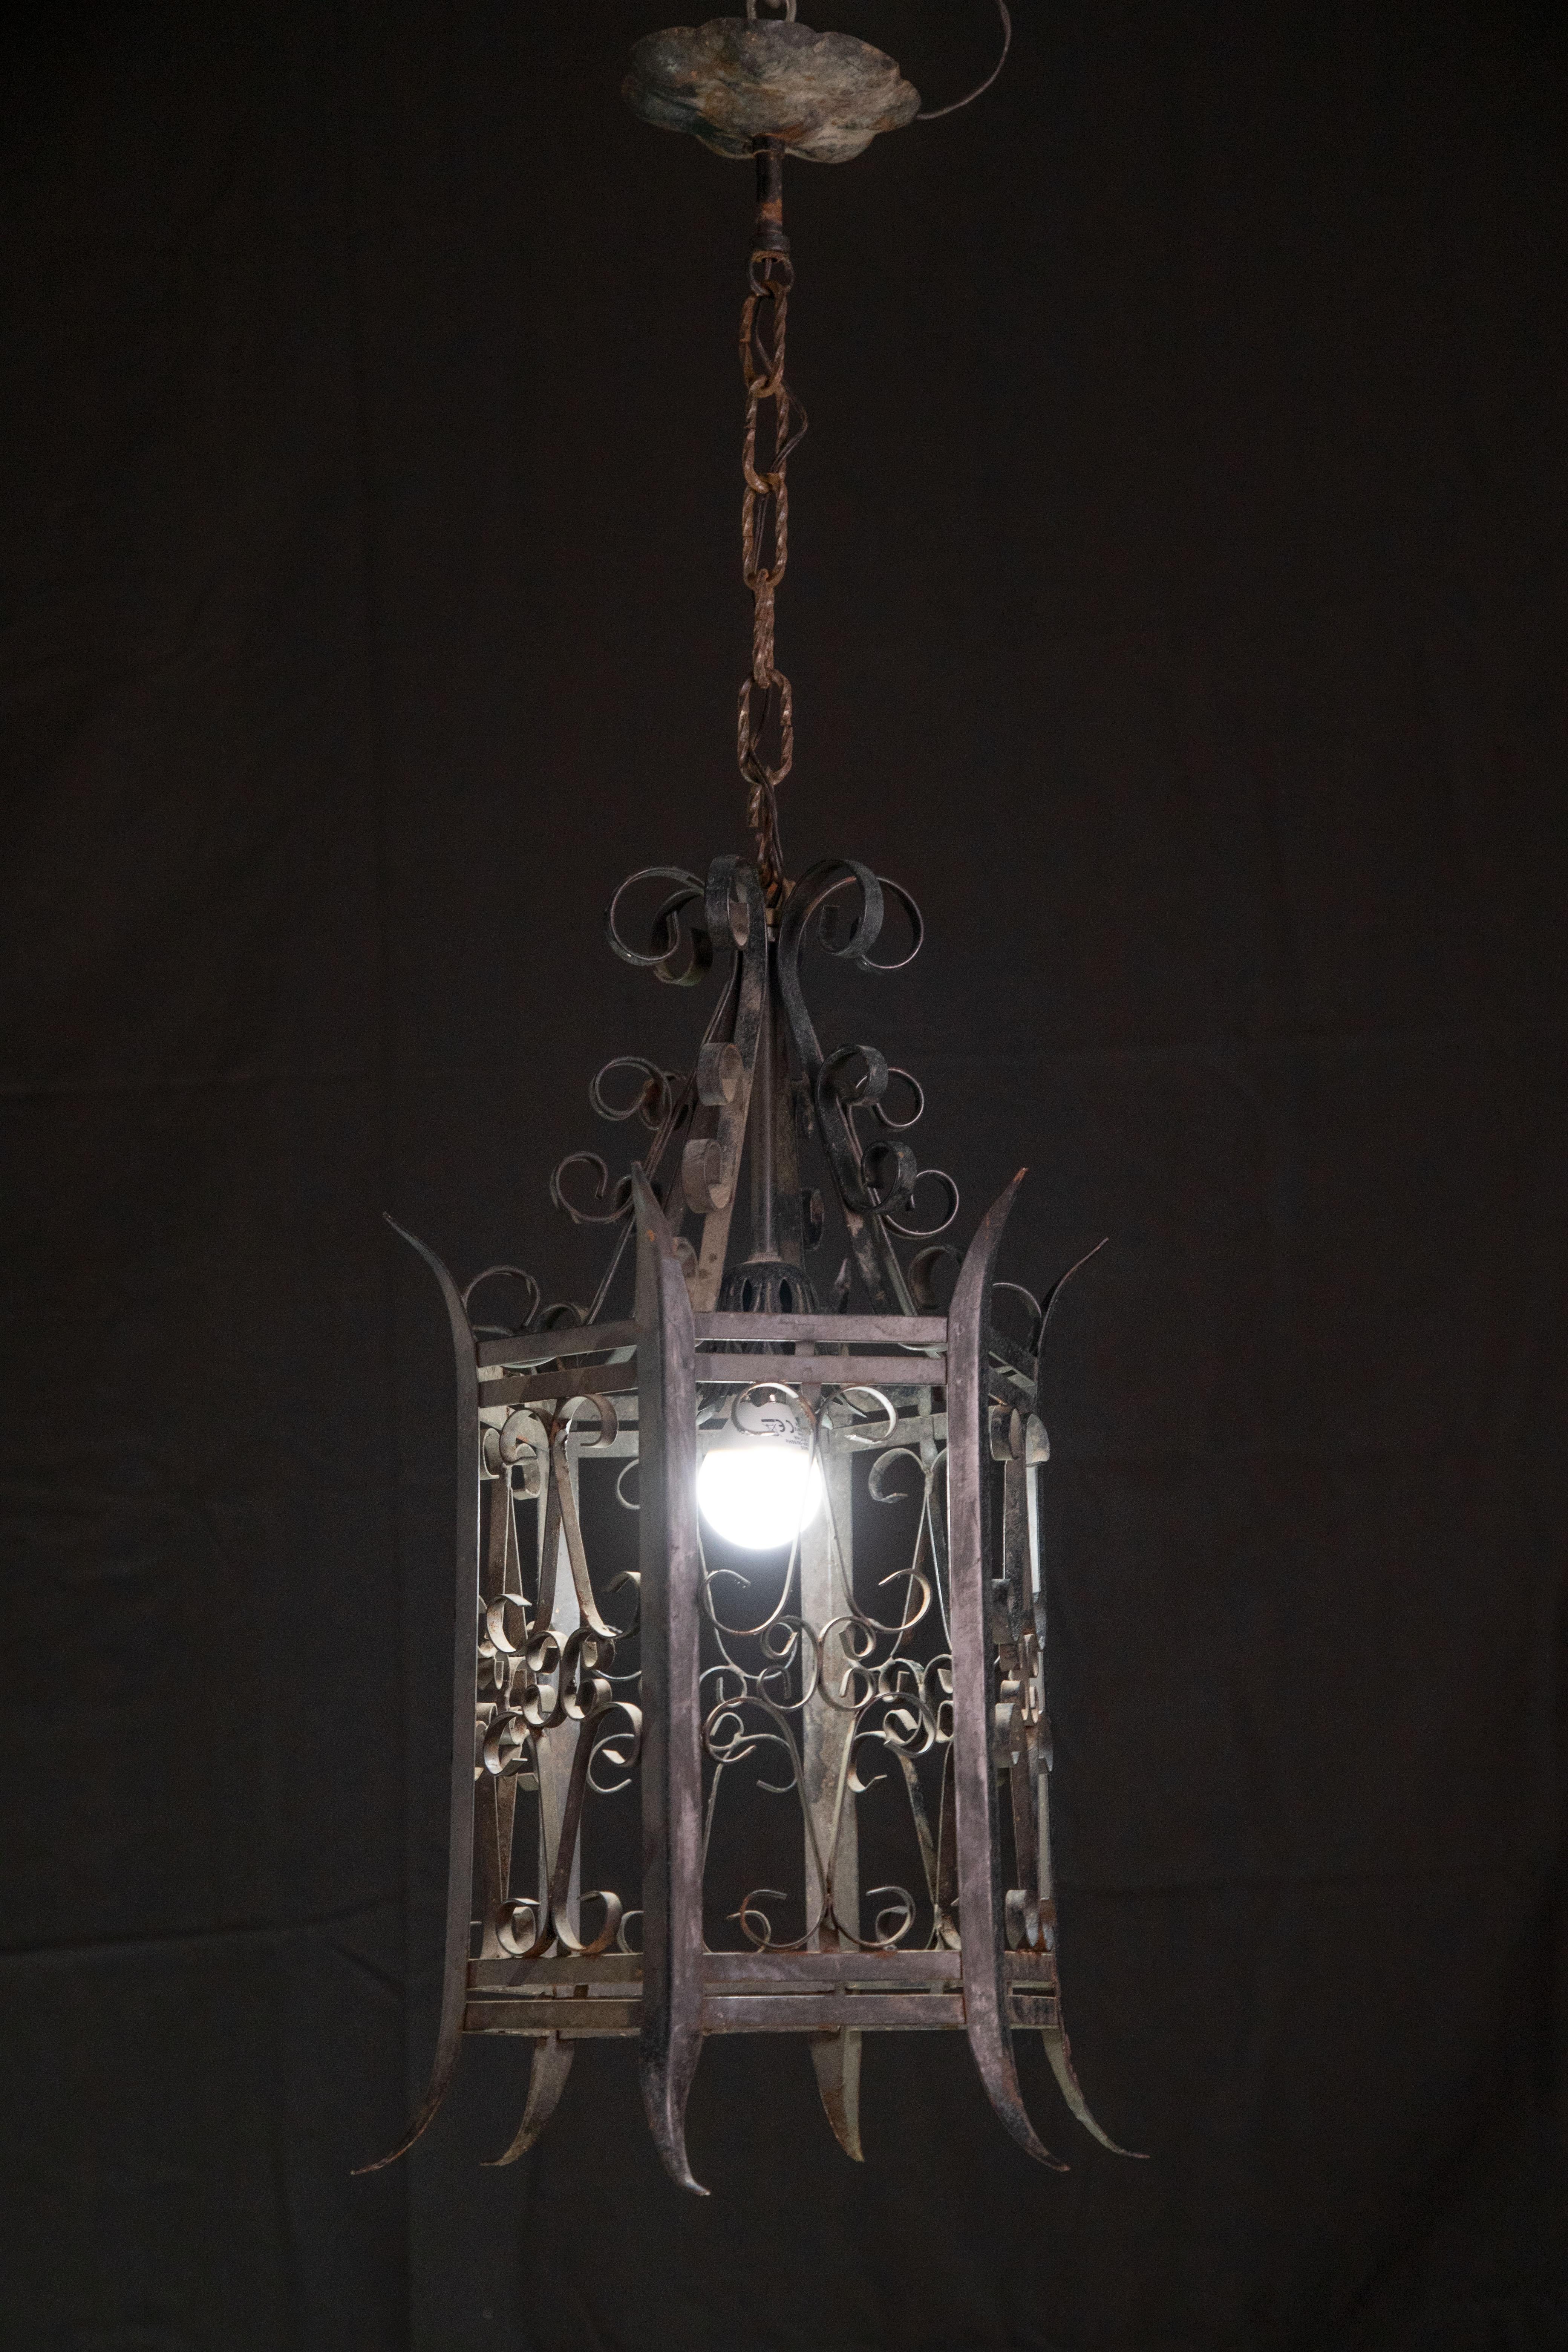 Vintage iron lantern suitable for decorating a porch or outdoor space.
The lantern is 80 centimeters high with chain, 60 centimeters without chain, the diameter measures 30 centimeters.
Mount an e14 light.
The structure shows some signs of aging.